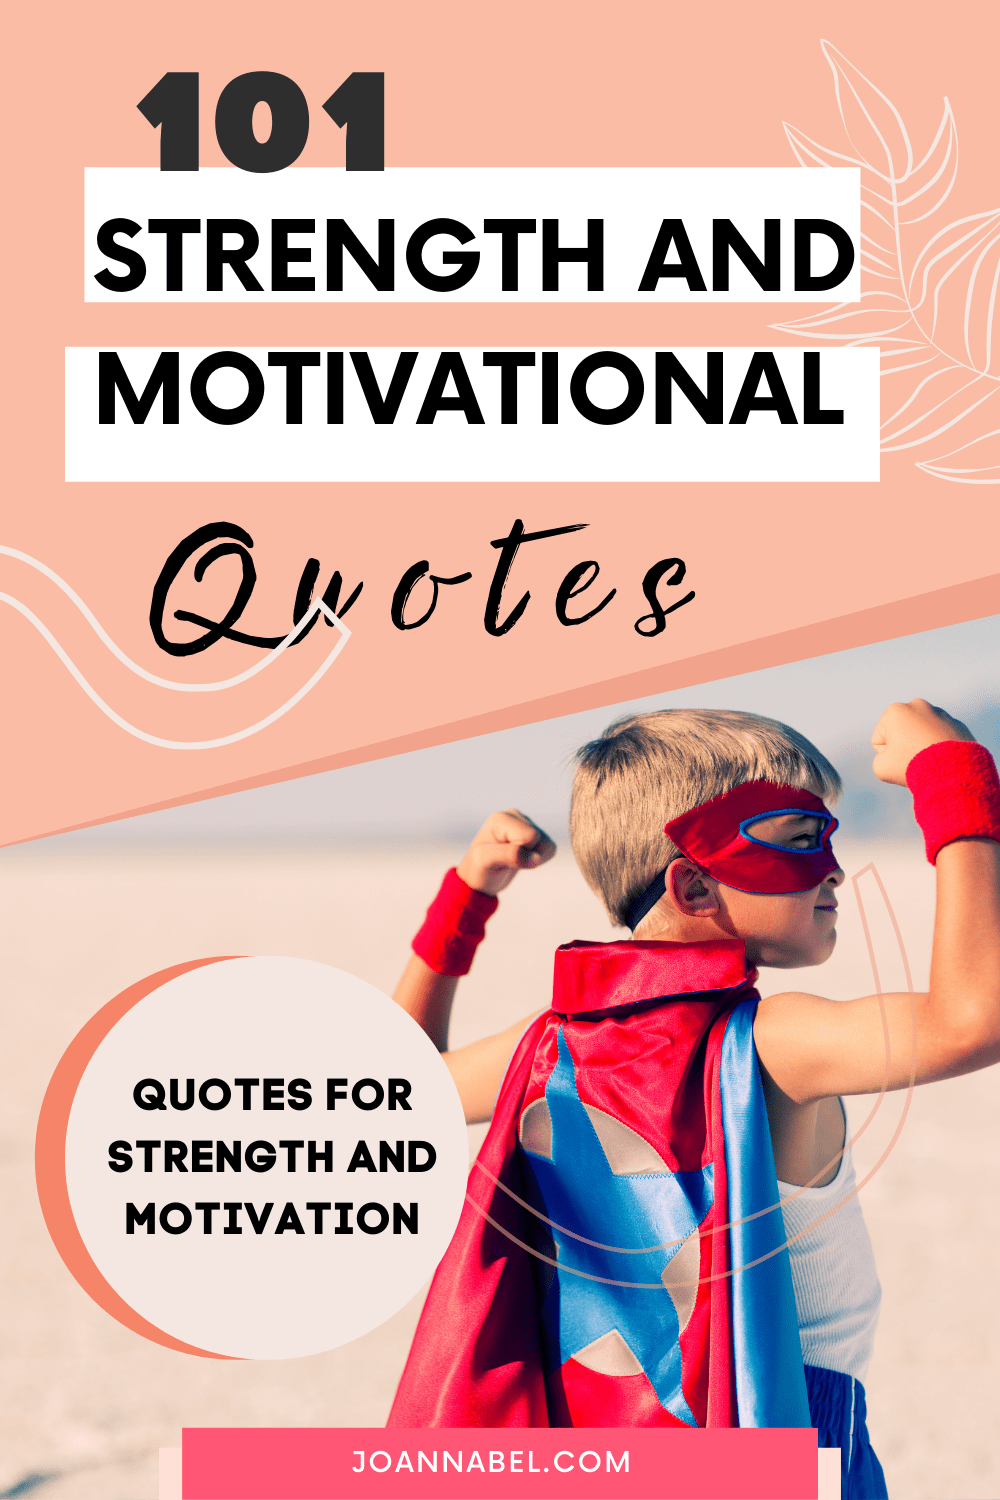 Pin image with text - 101 strength and motivational quotes and a photo of a boy dressed in a superhero costume with a red cape and a red eye mask